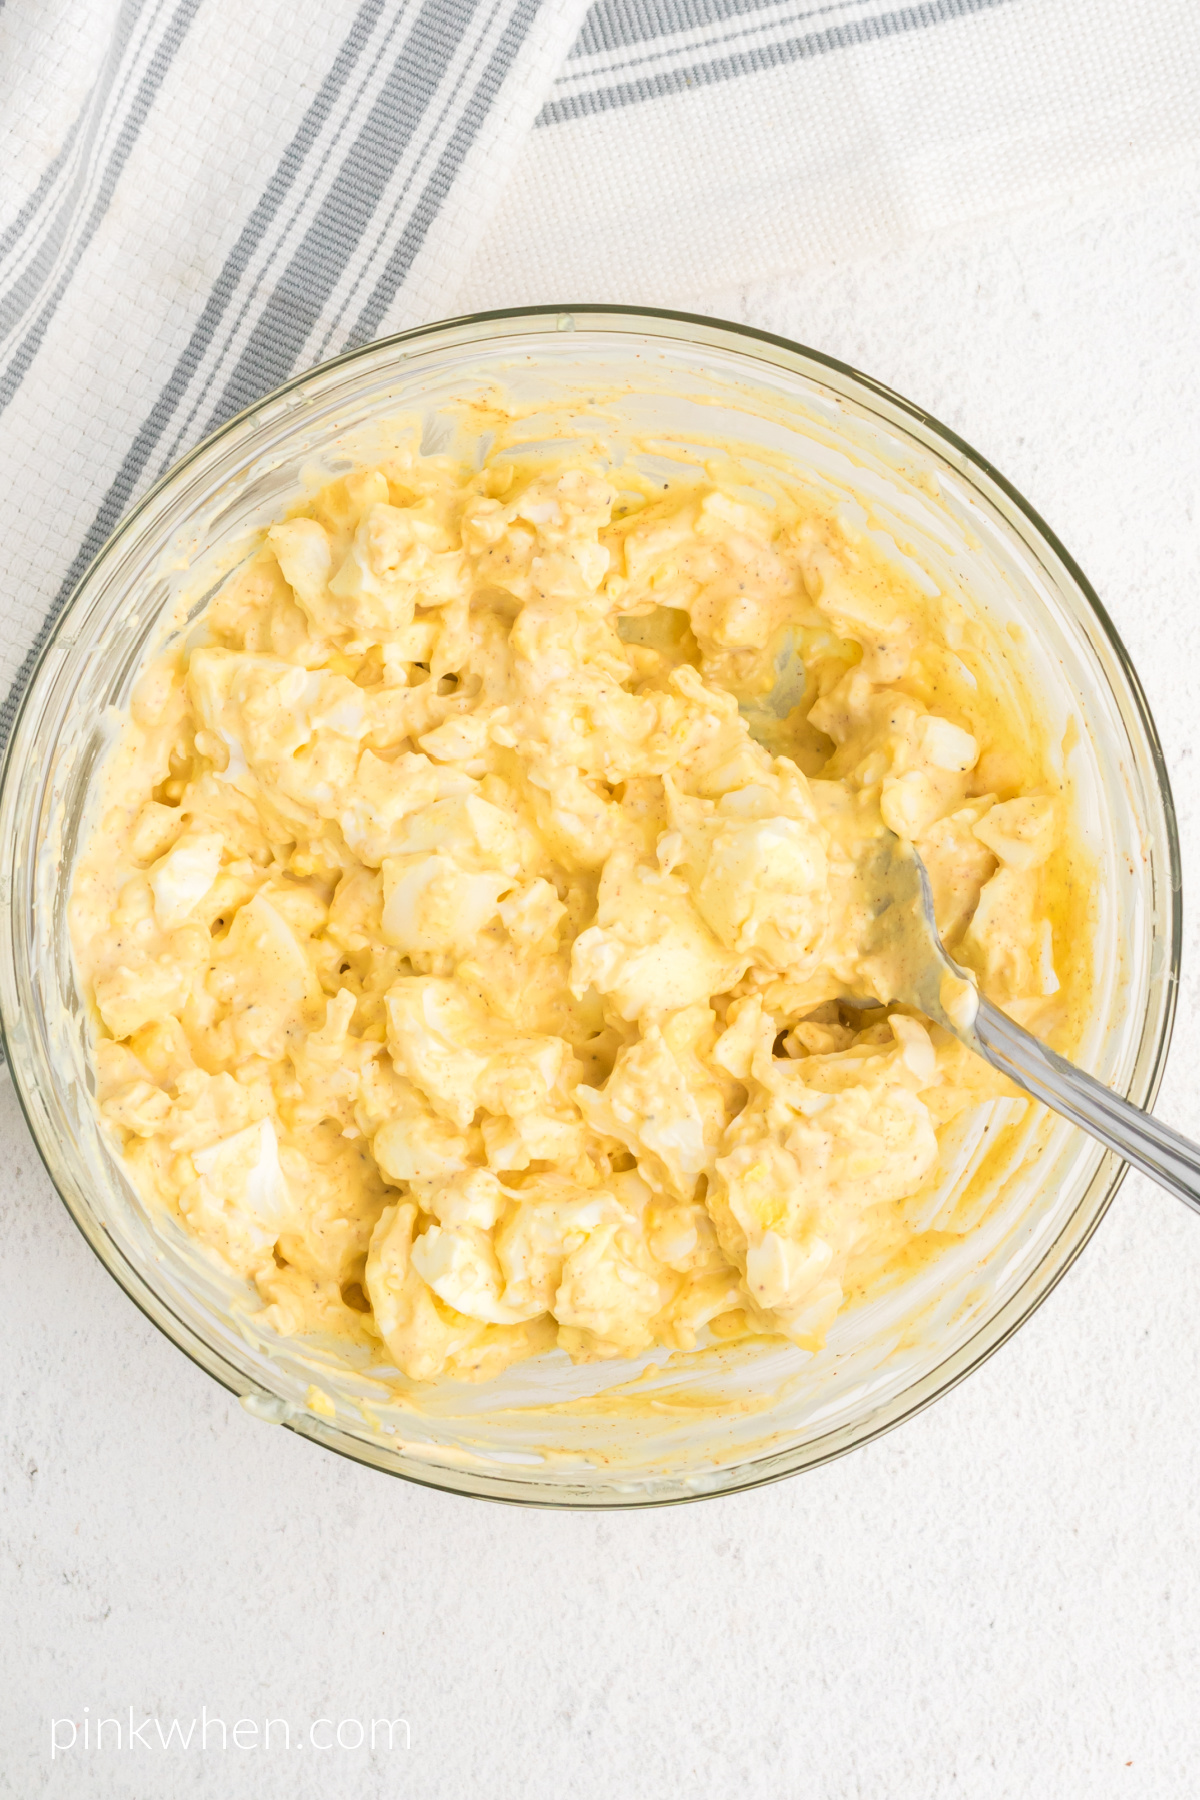 Ingredients combined in a bowl to make egg salad. 